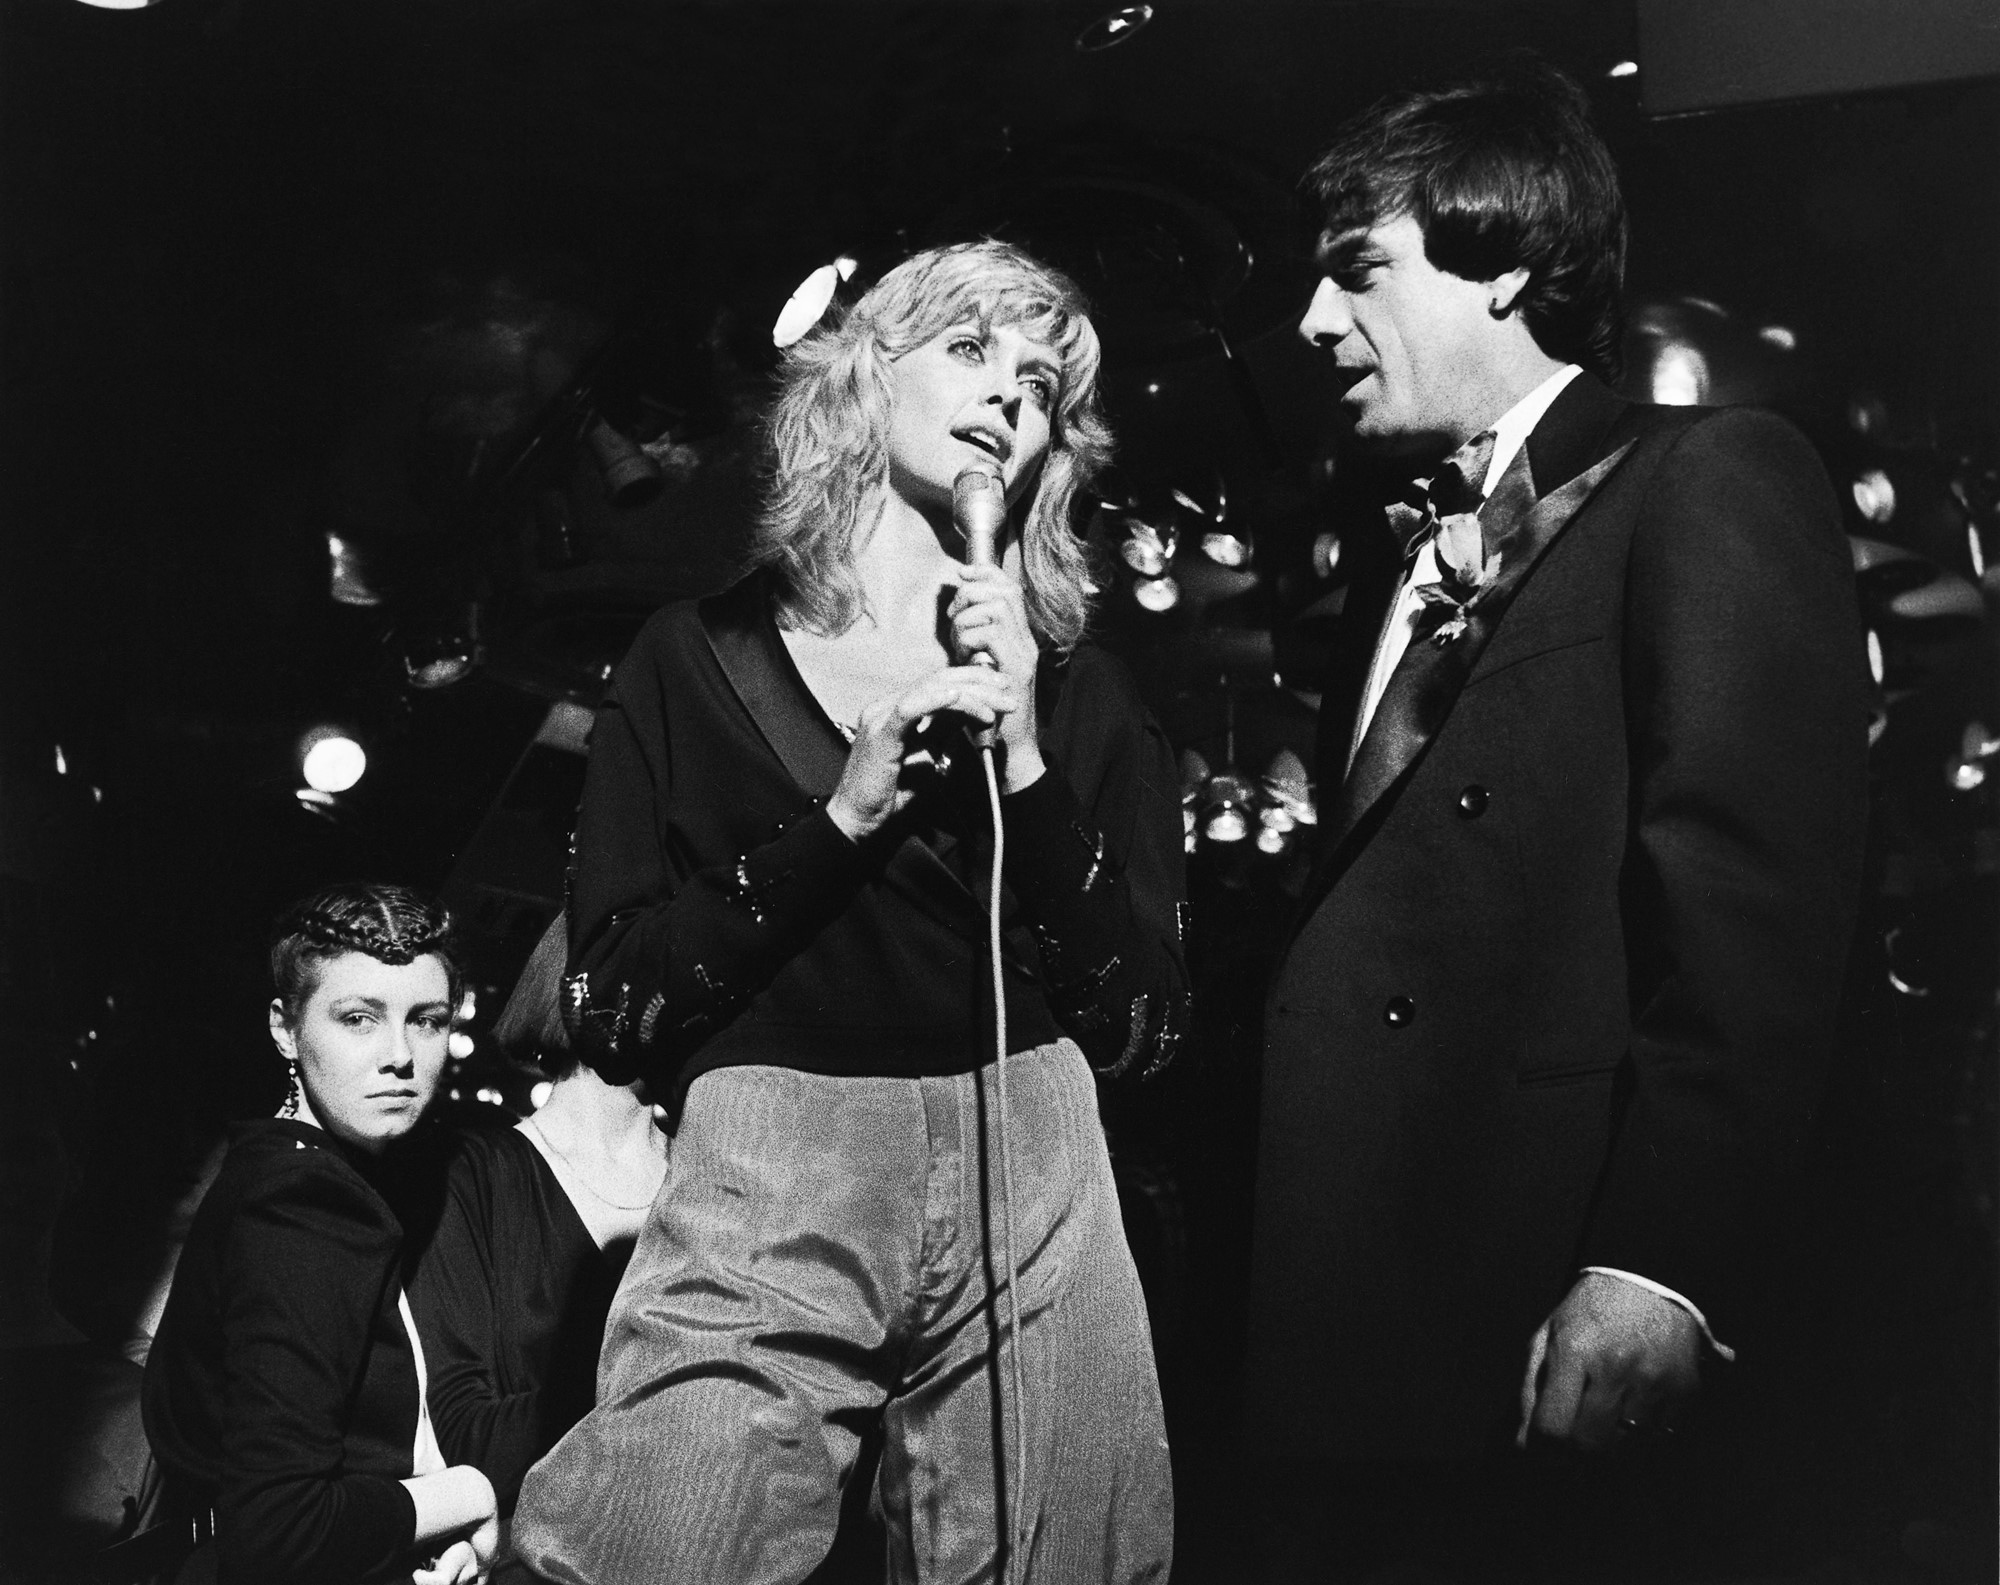 A black and white photo shows Olivia Newton-John and Molly Meldrum performing together.